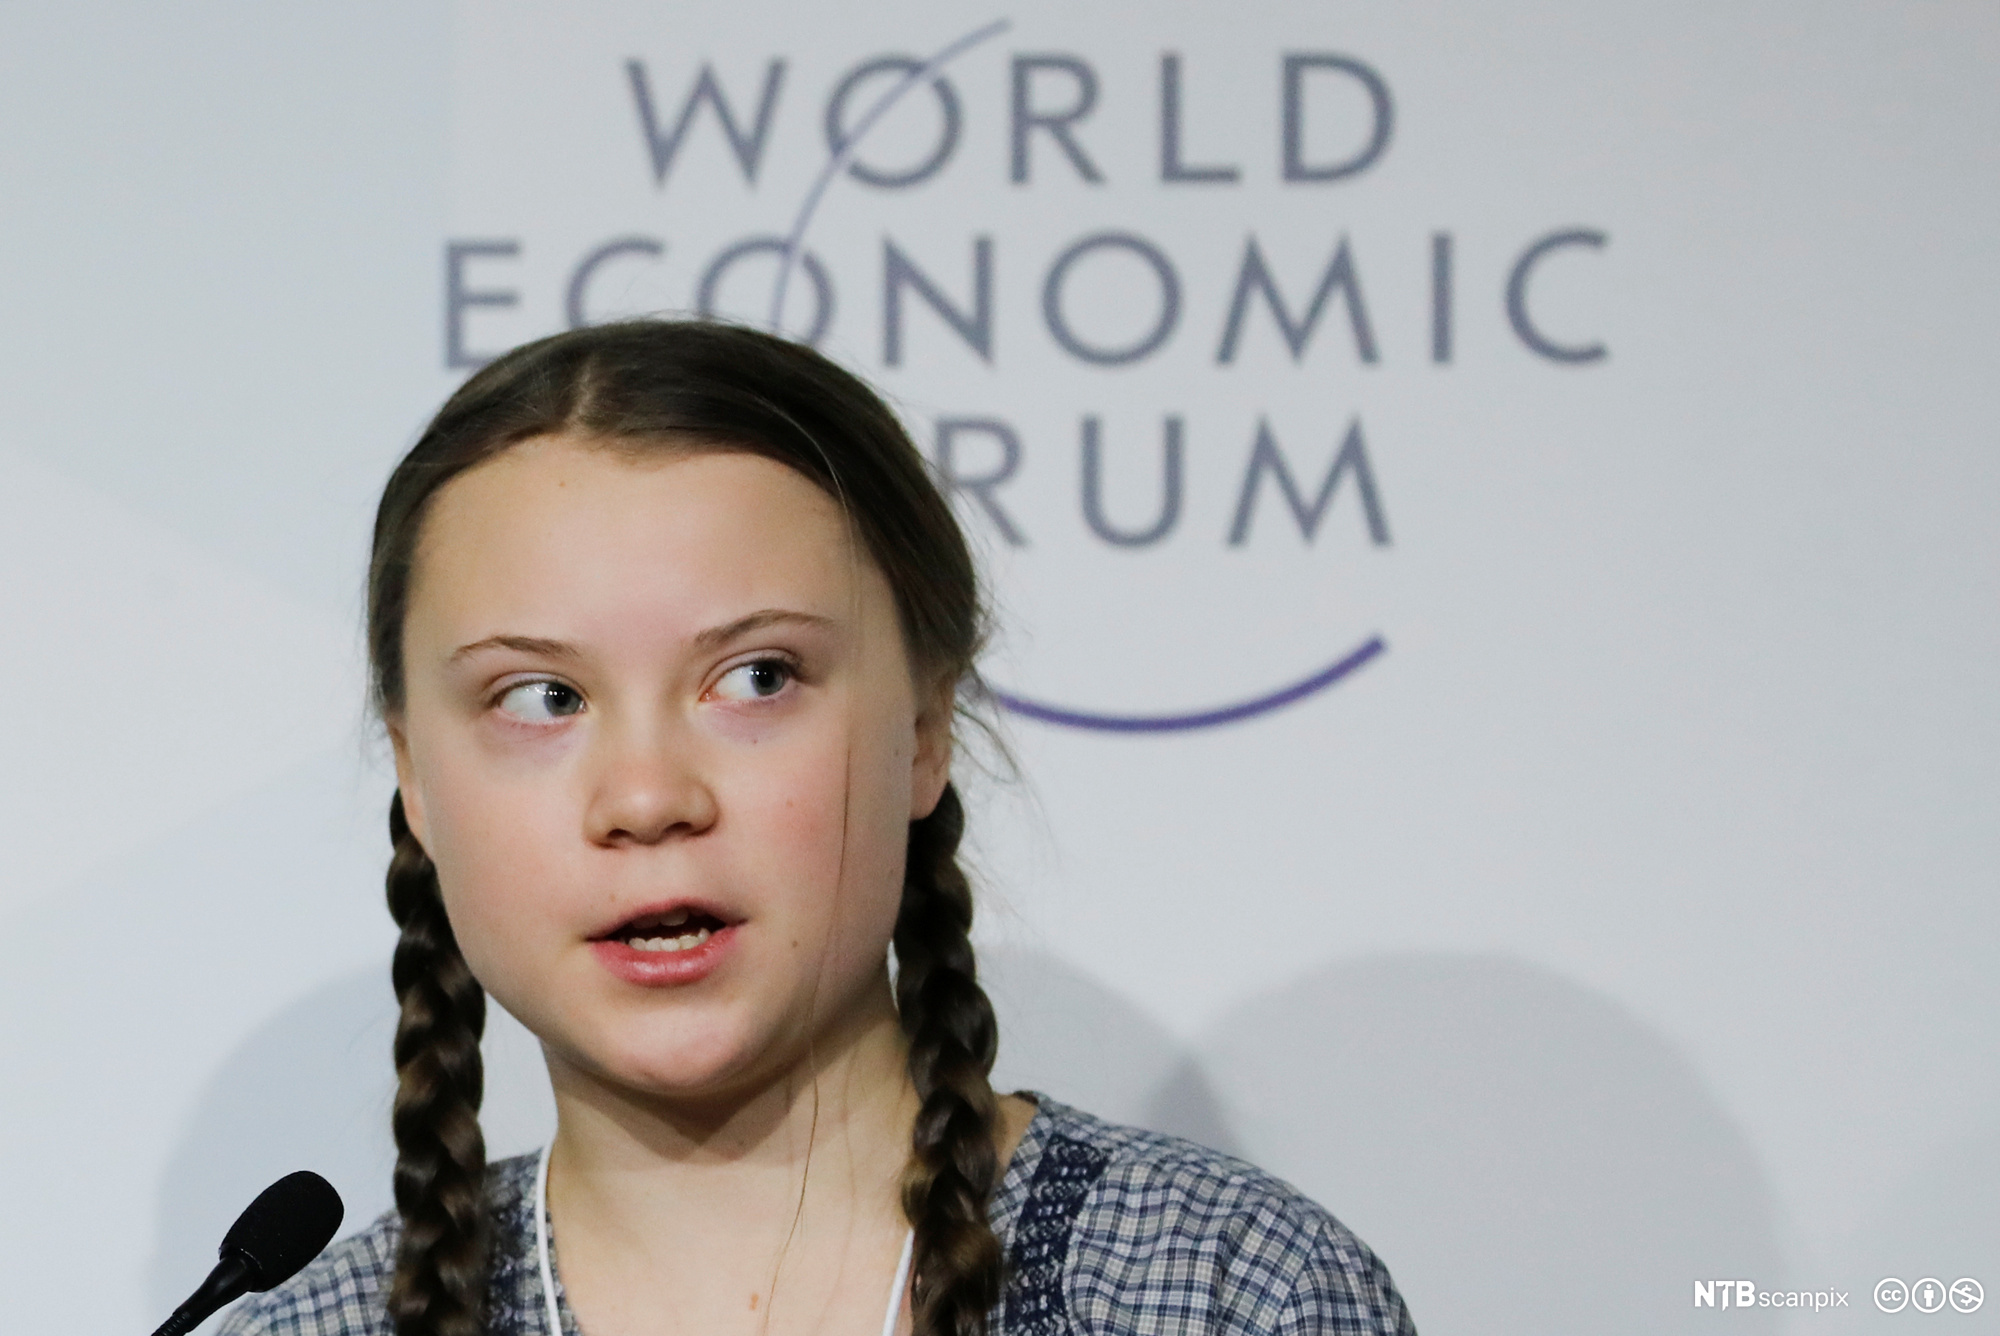 16-year old Swedish environmental activist Greta Thunberg takes part in a panel discussion during the World Economic Forum (WEF) annual meeting in Davos, Switzerland, January 25, 2019. REUTERS/Arnd Wiegmann